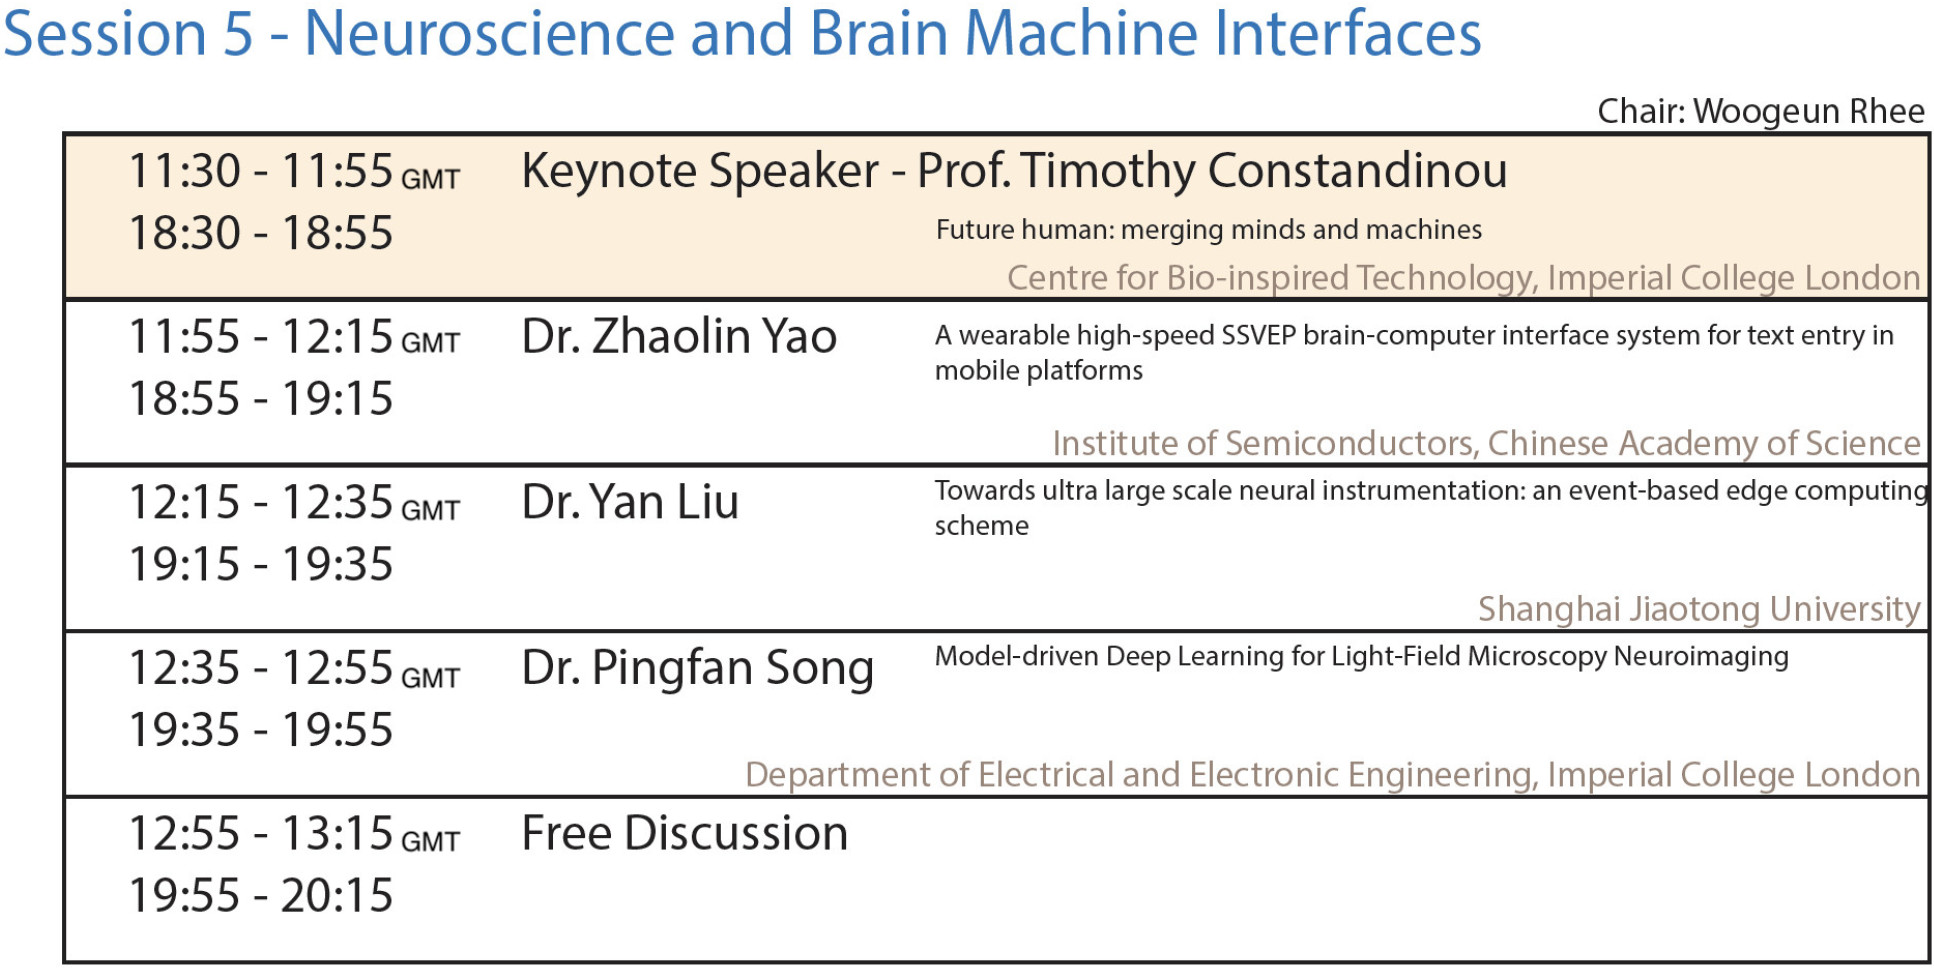 Session 5 - Neuroscience and Brain Machine Interfaces